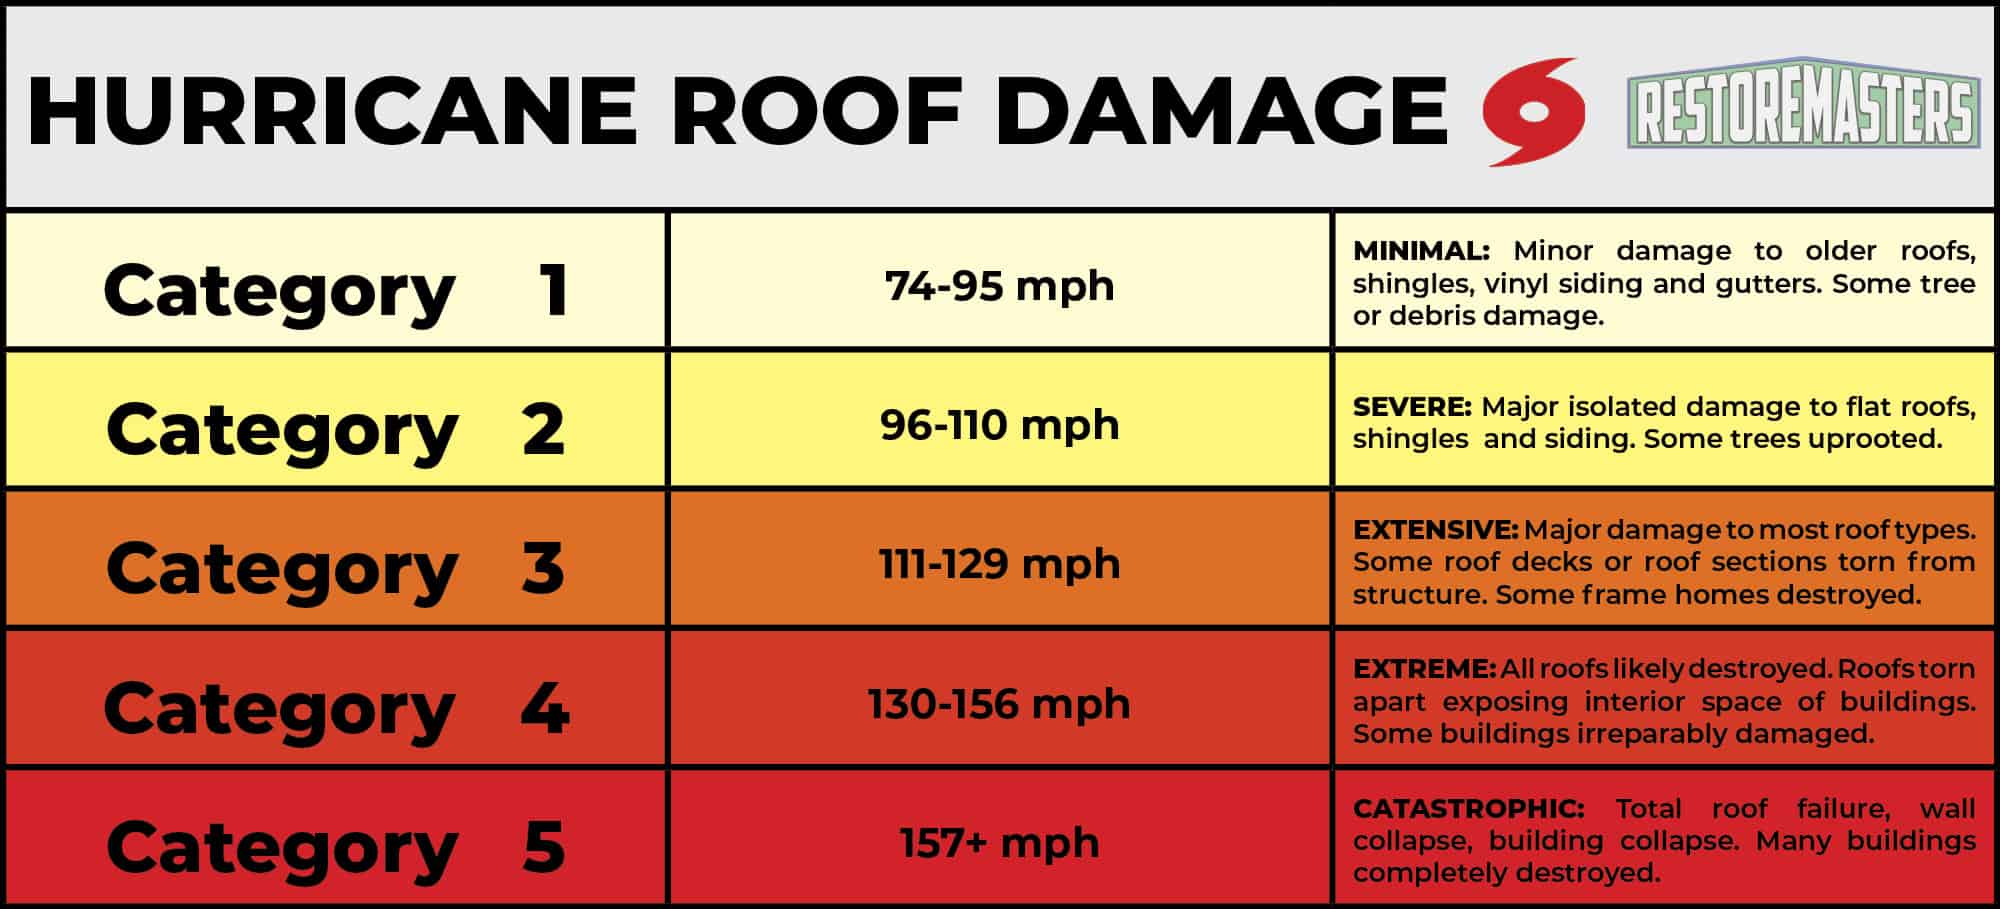 Roof Damage by Hurricane Category